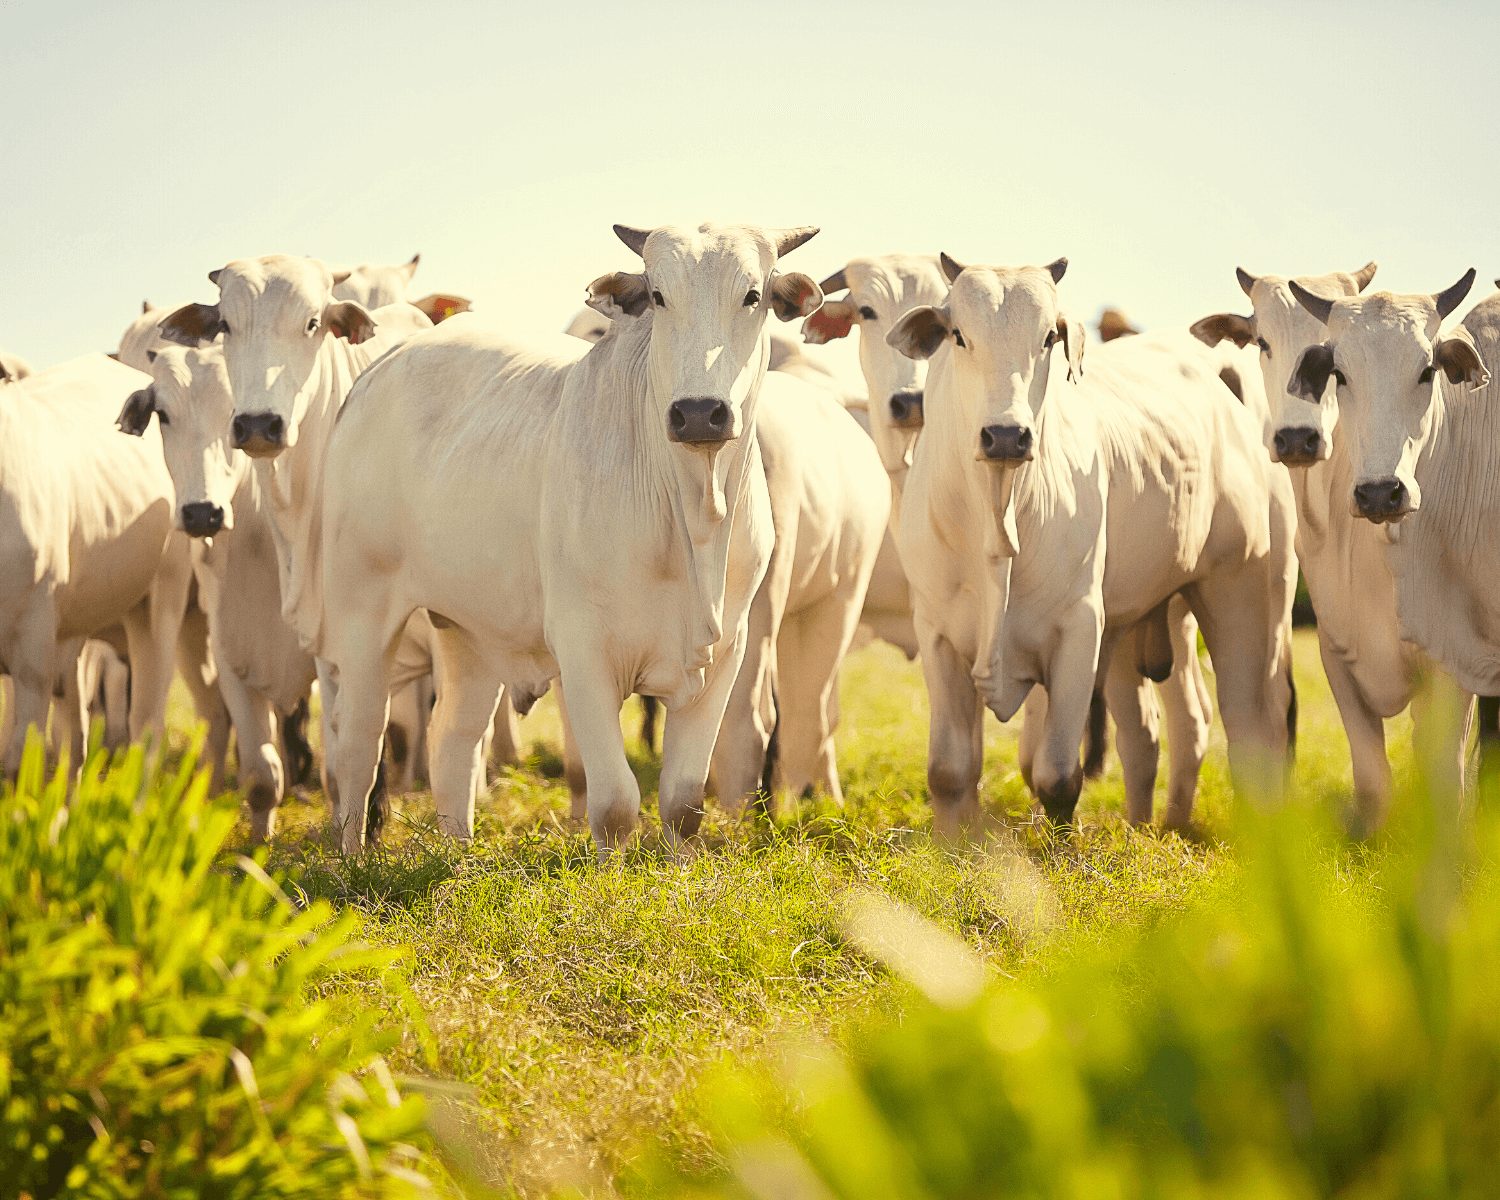 Start-up seeks to create an additive to reduce livestock methane emissions